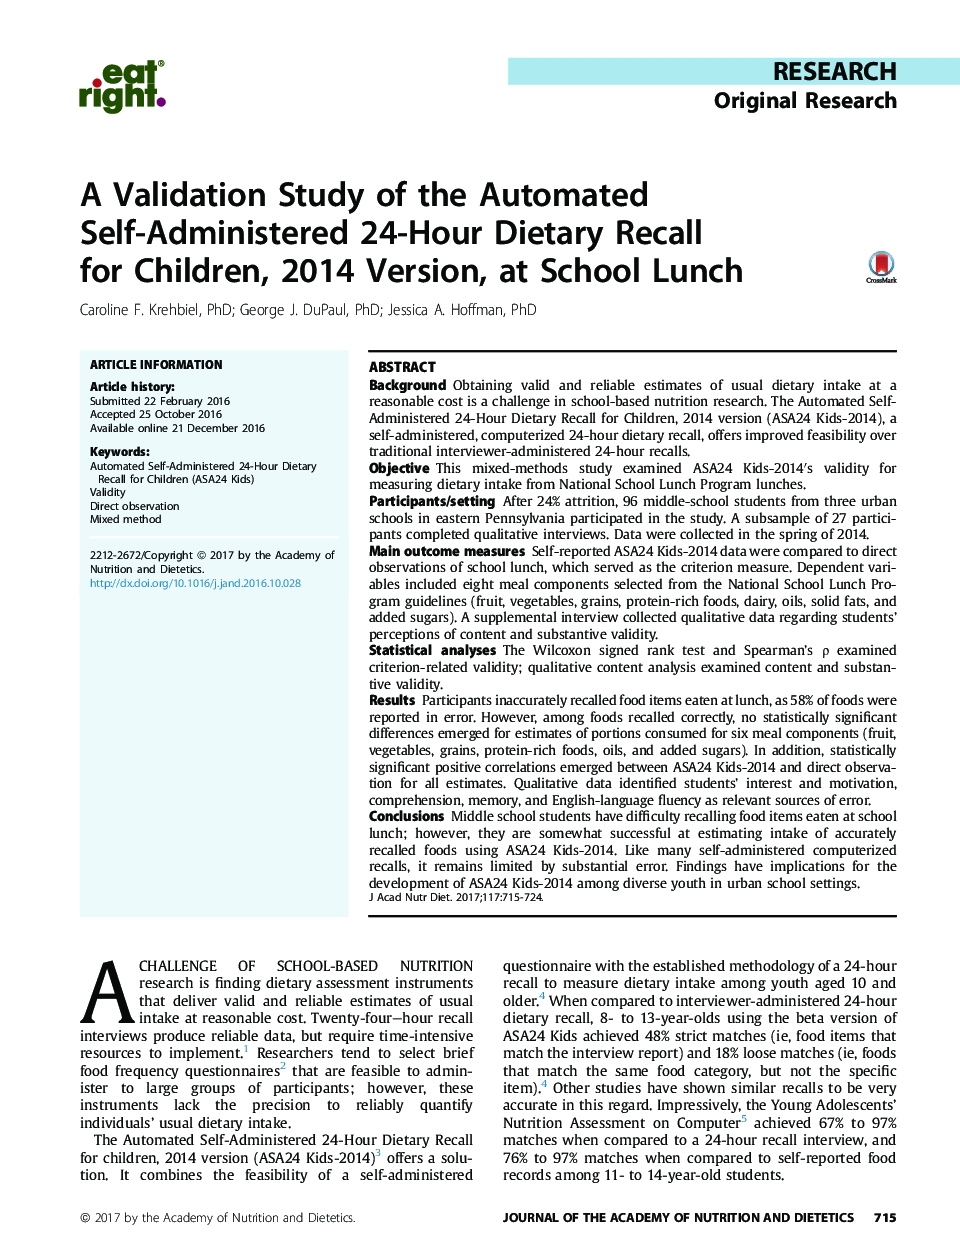 A Validation Study of the Automated Self-Administered 24-Hour Dietary Recall forÂ Children, 2014 Version, at School Lunch